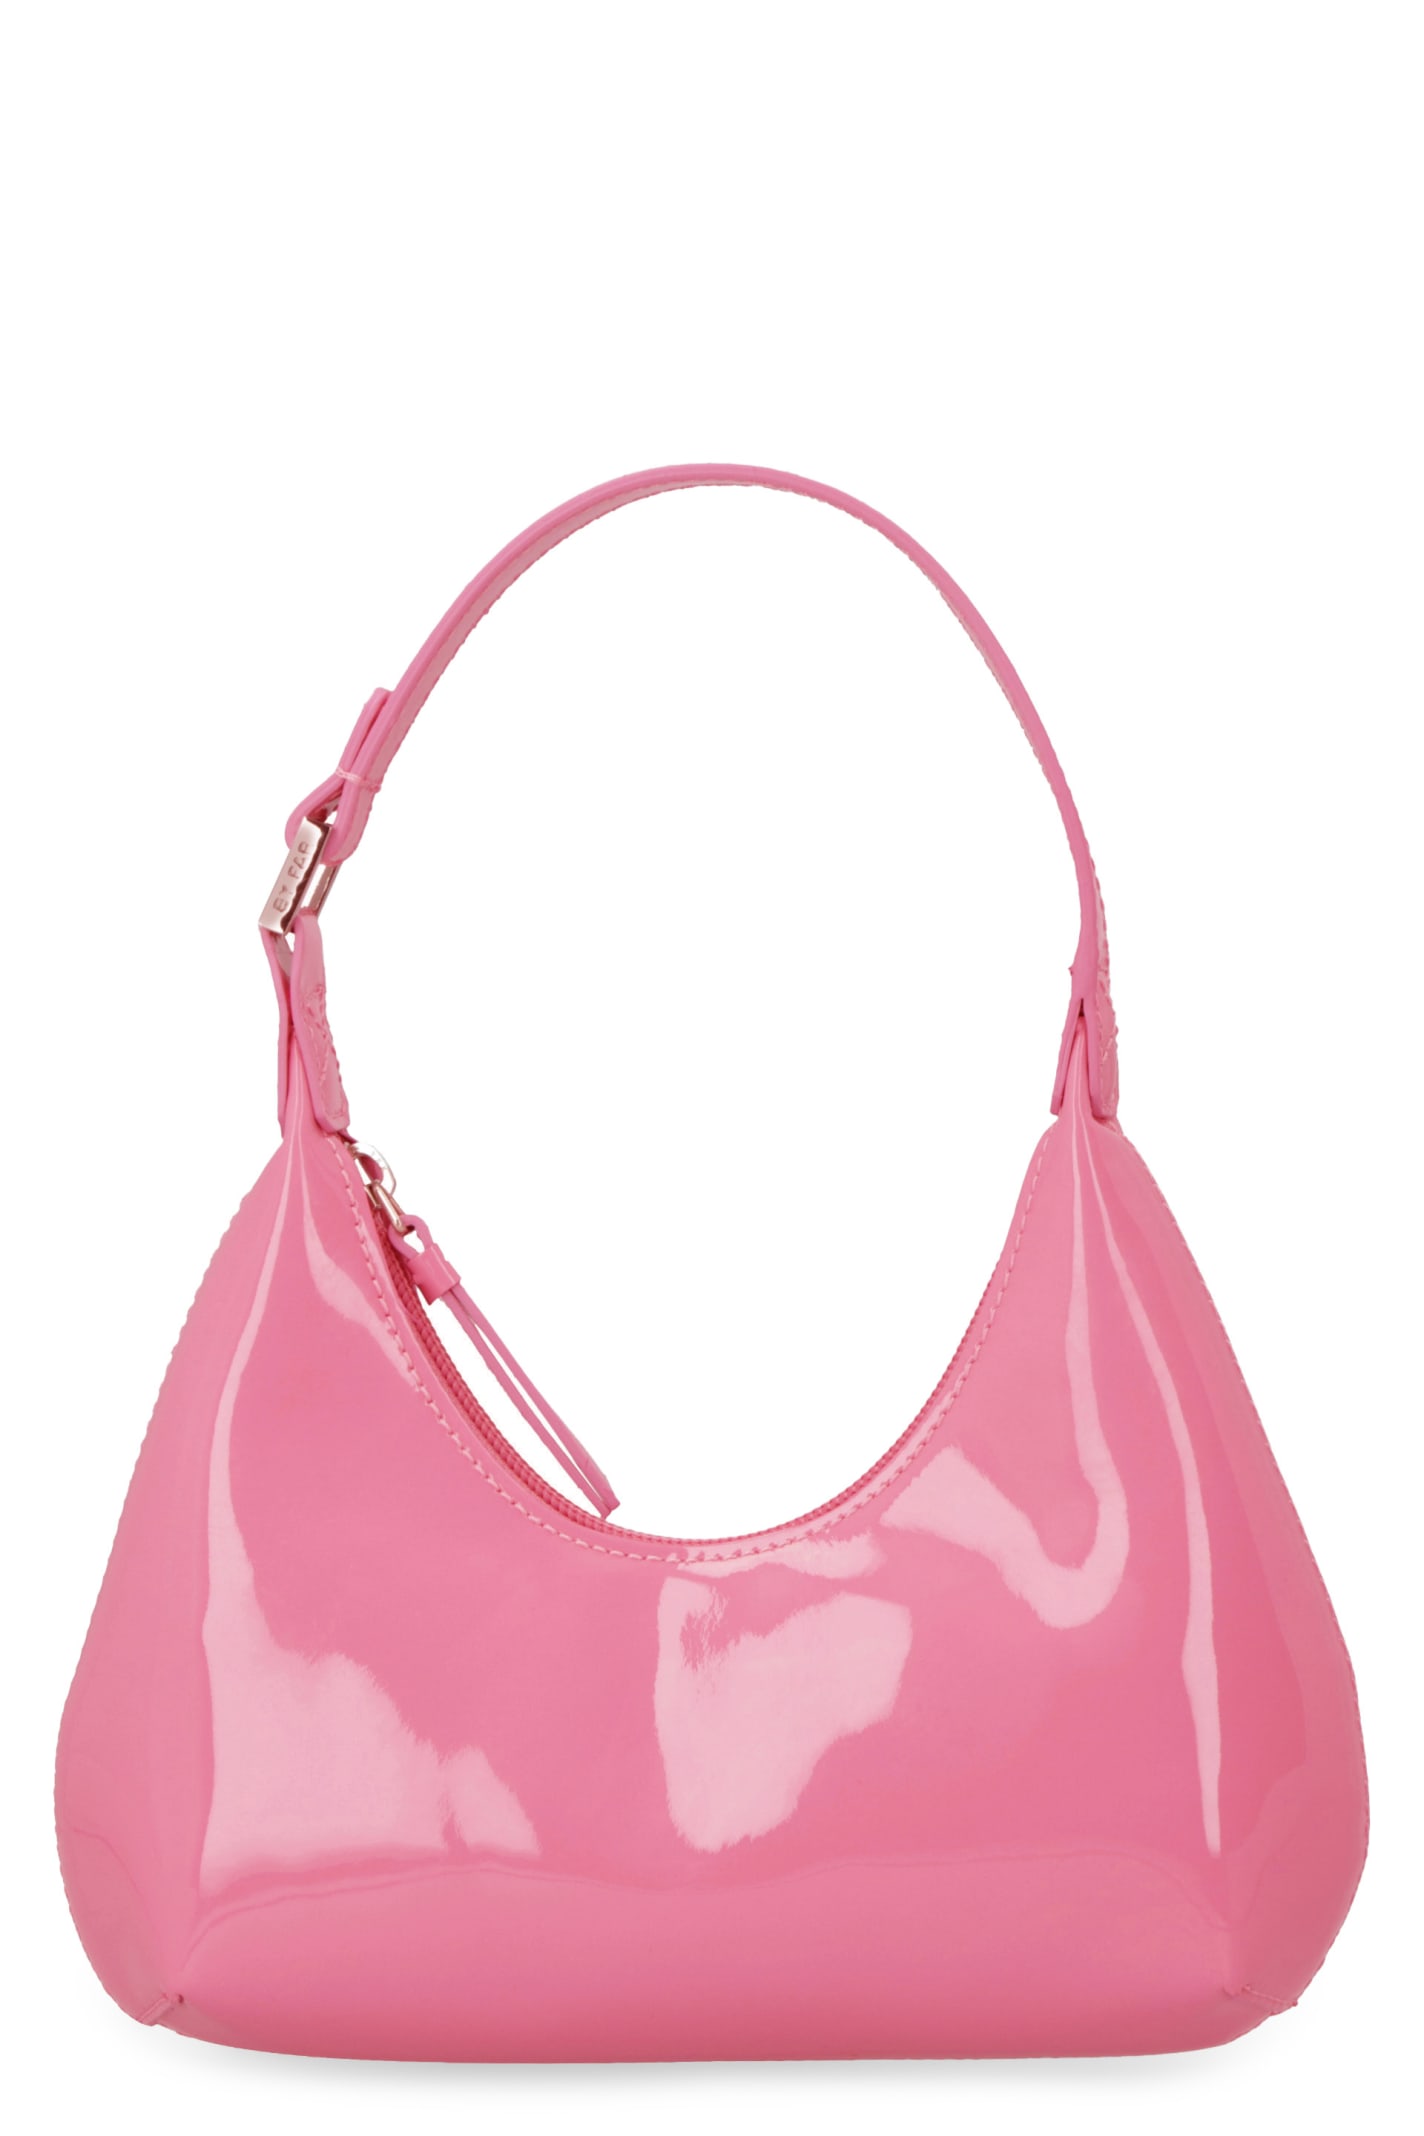 BY FAR Baby Amber Patent Leather Handbag